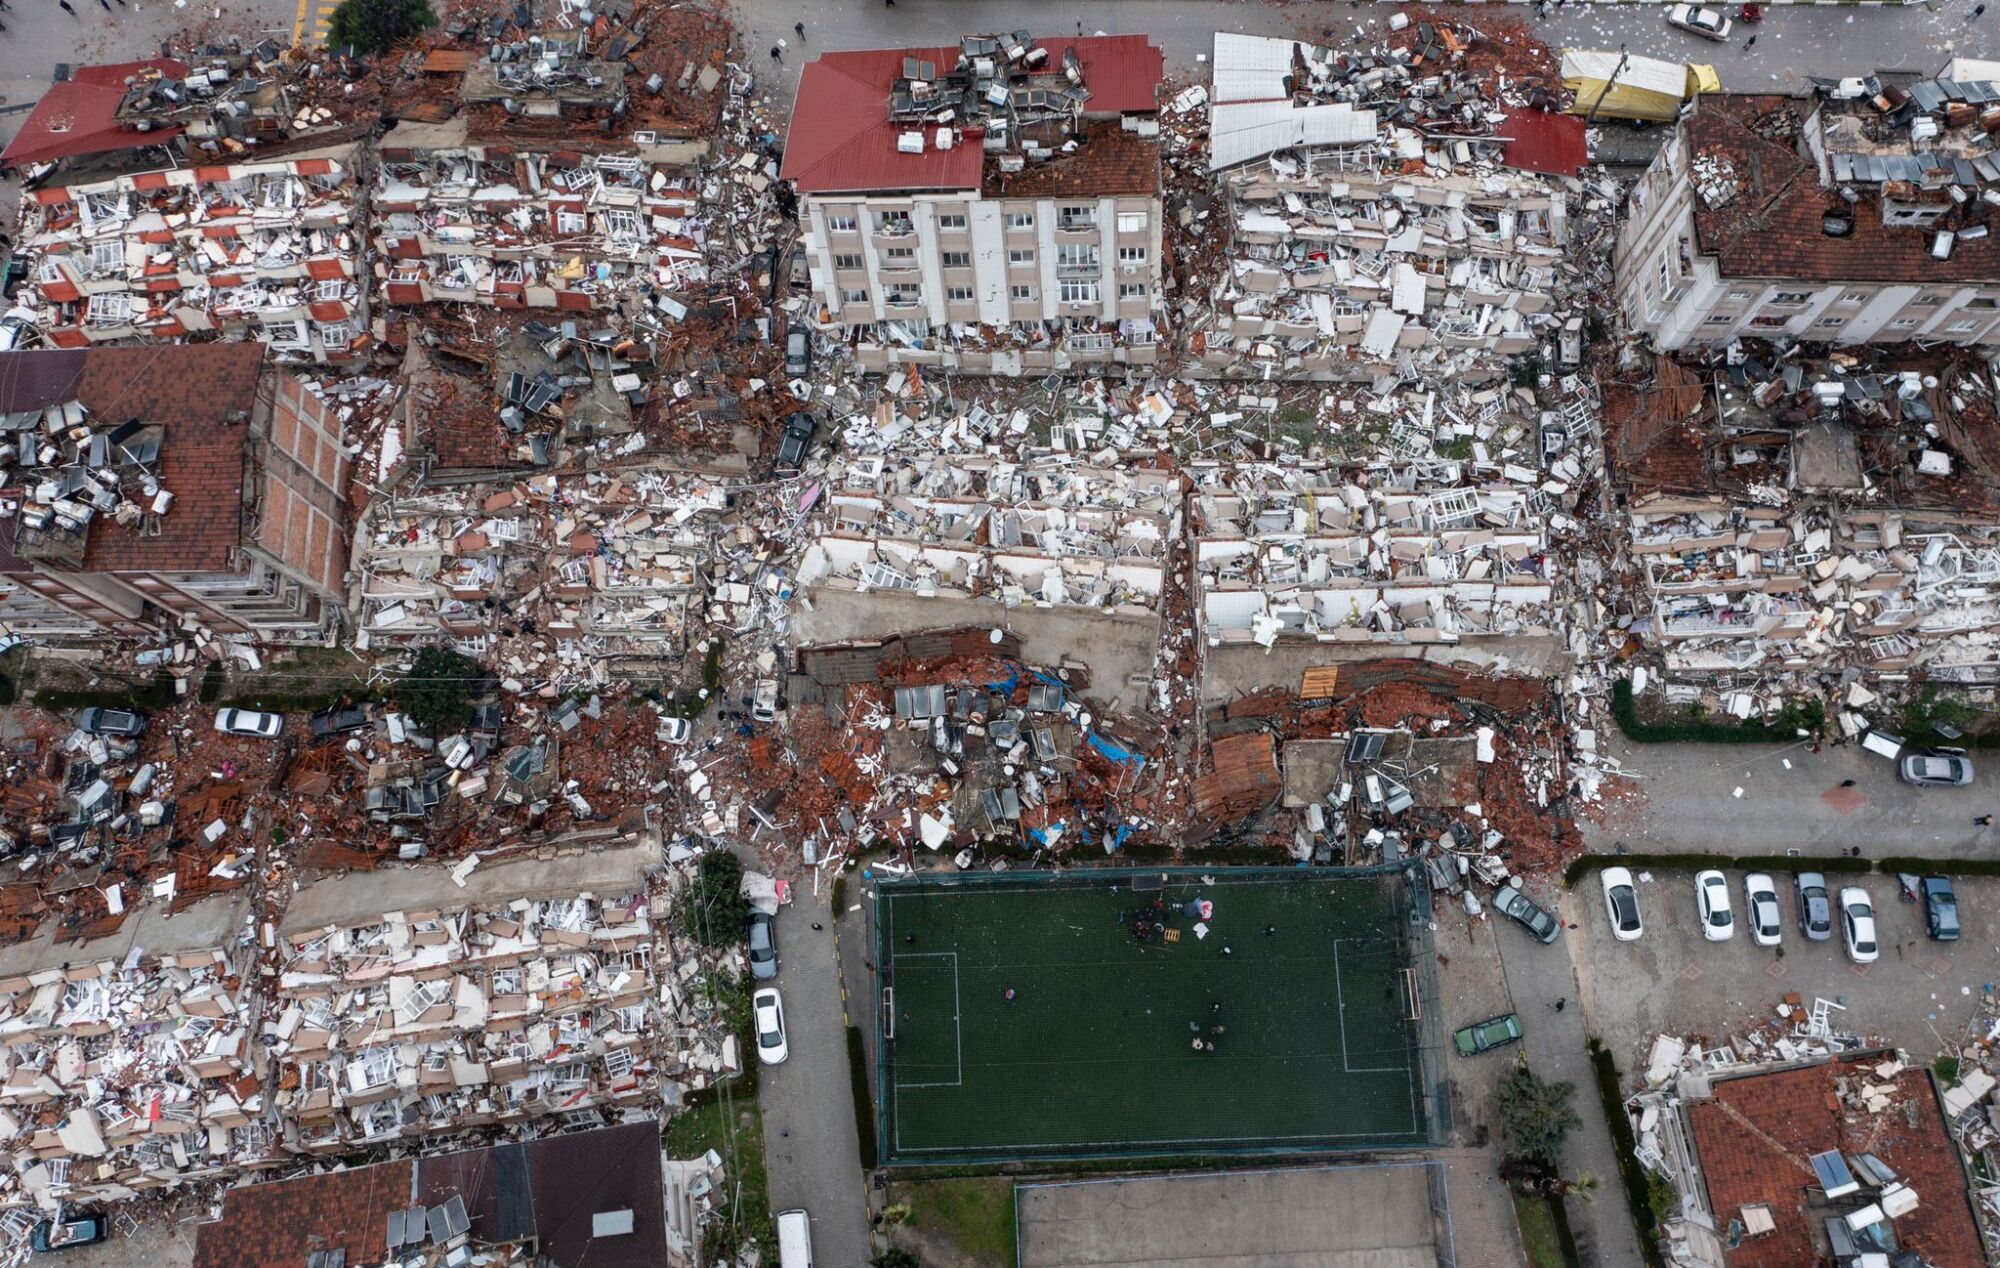 An aerial view of debris of a collapsed buildings near a clean soccer field. 